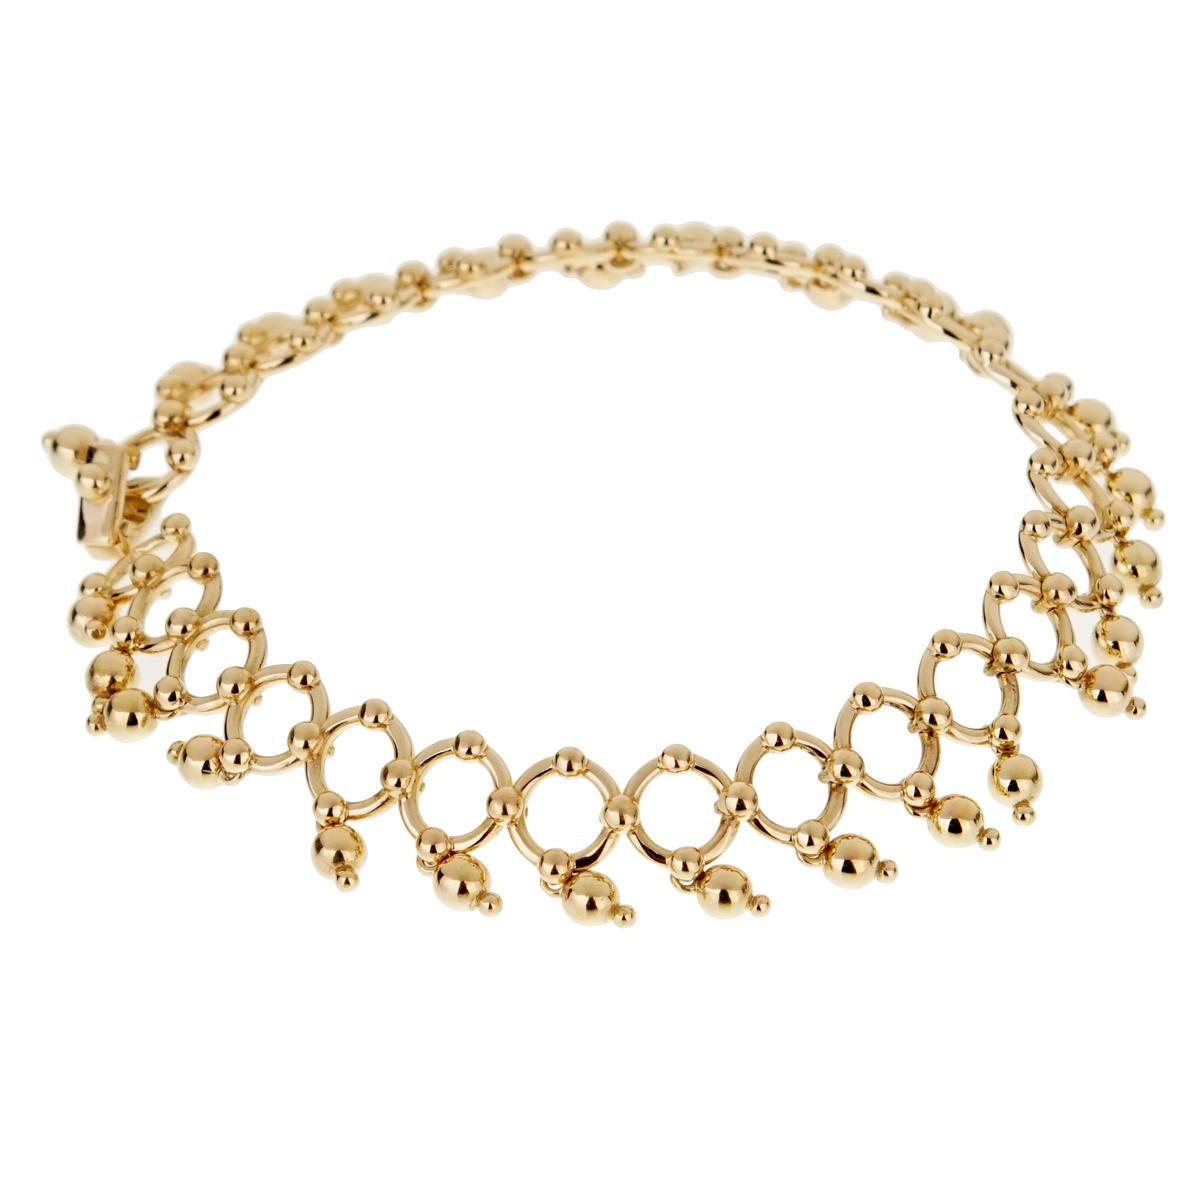 A fabulous 18k yellow gold bracelet by Tiffany & Co featuring round links with dangling 18k beads.